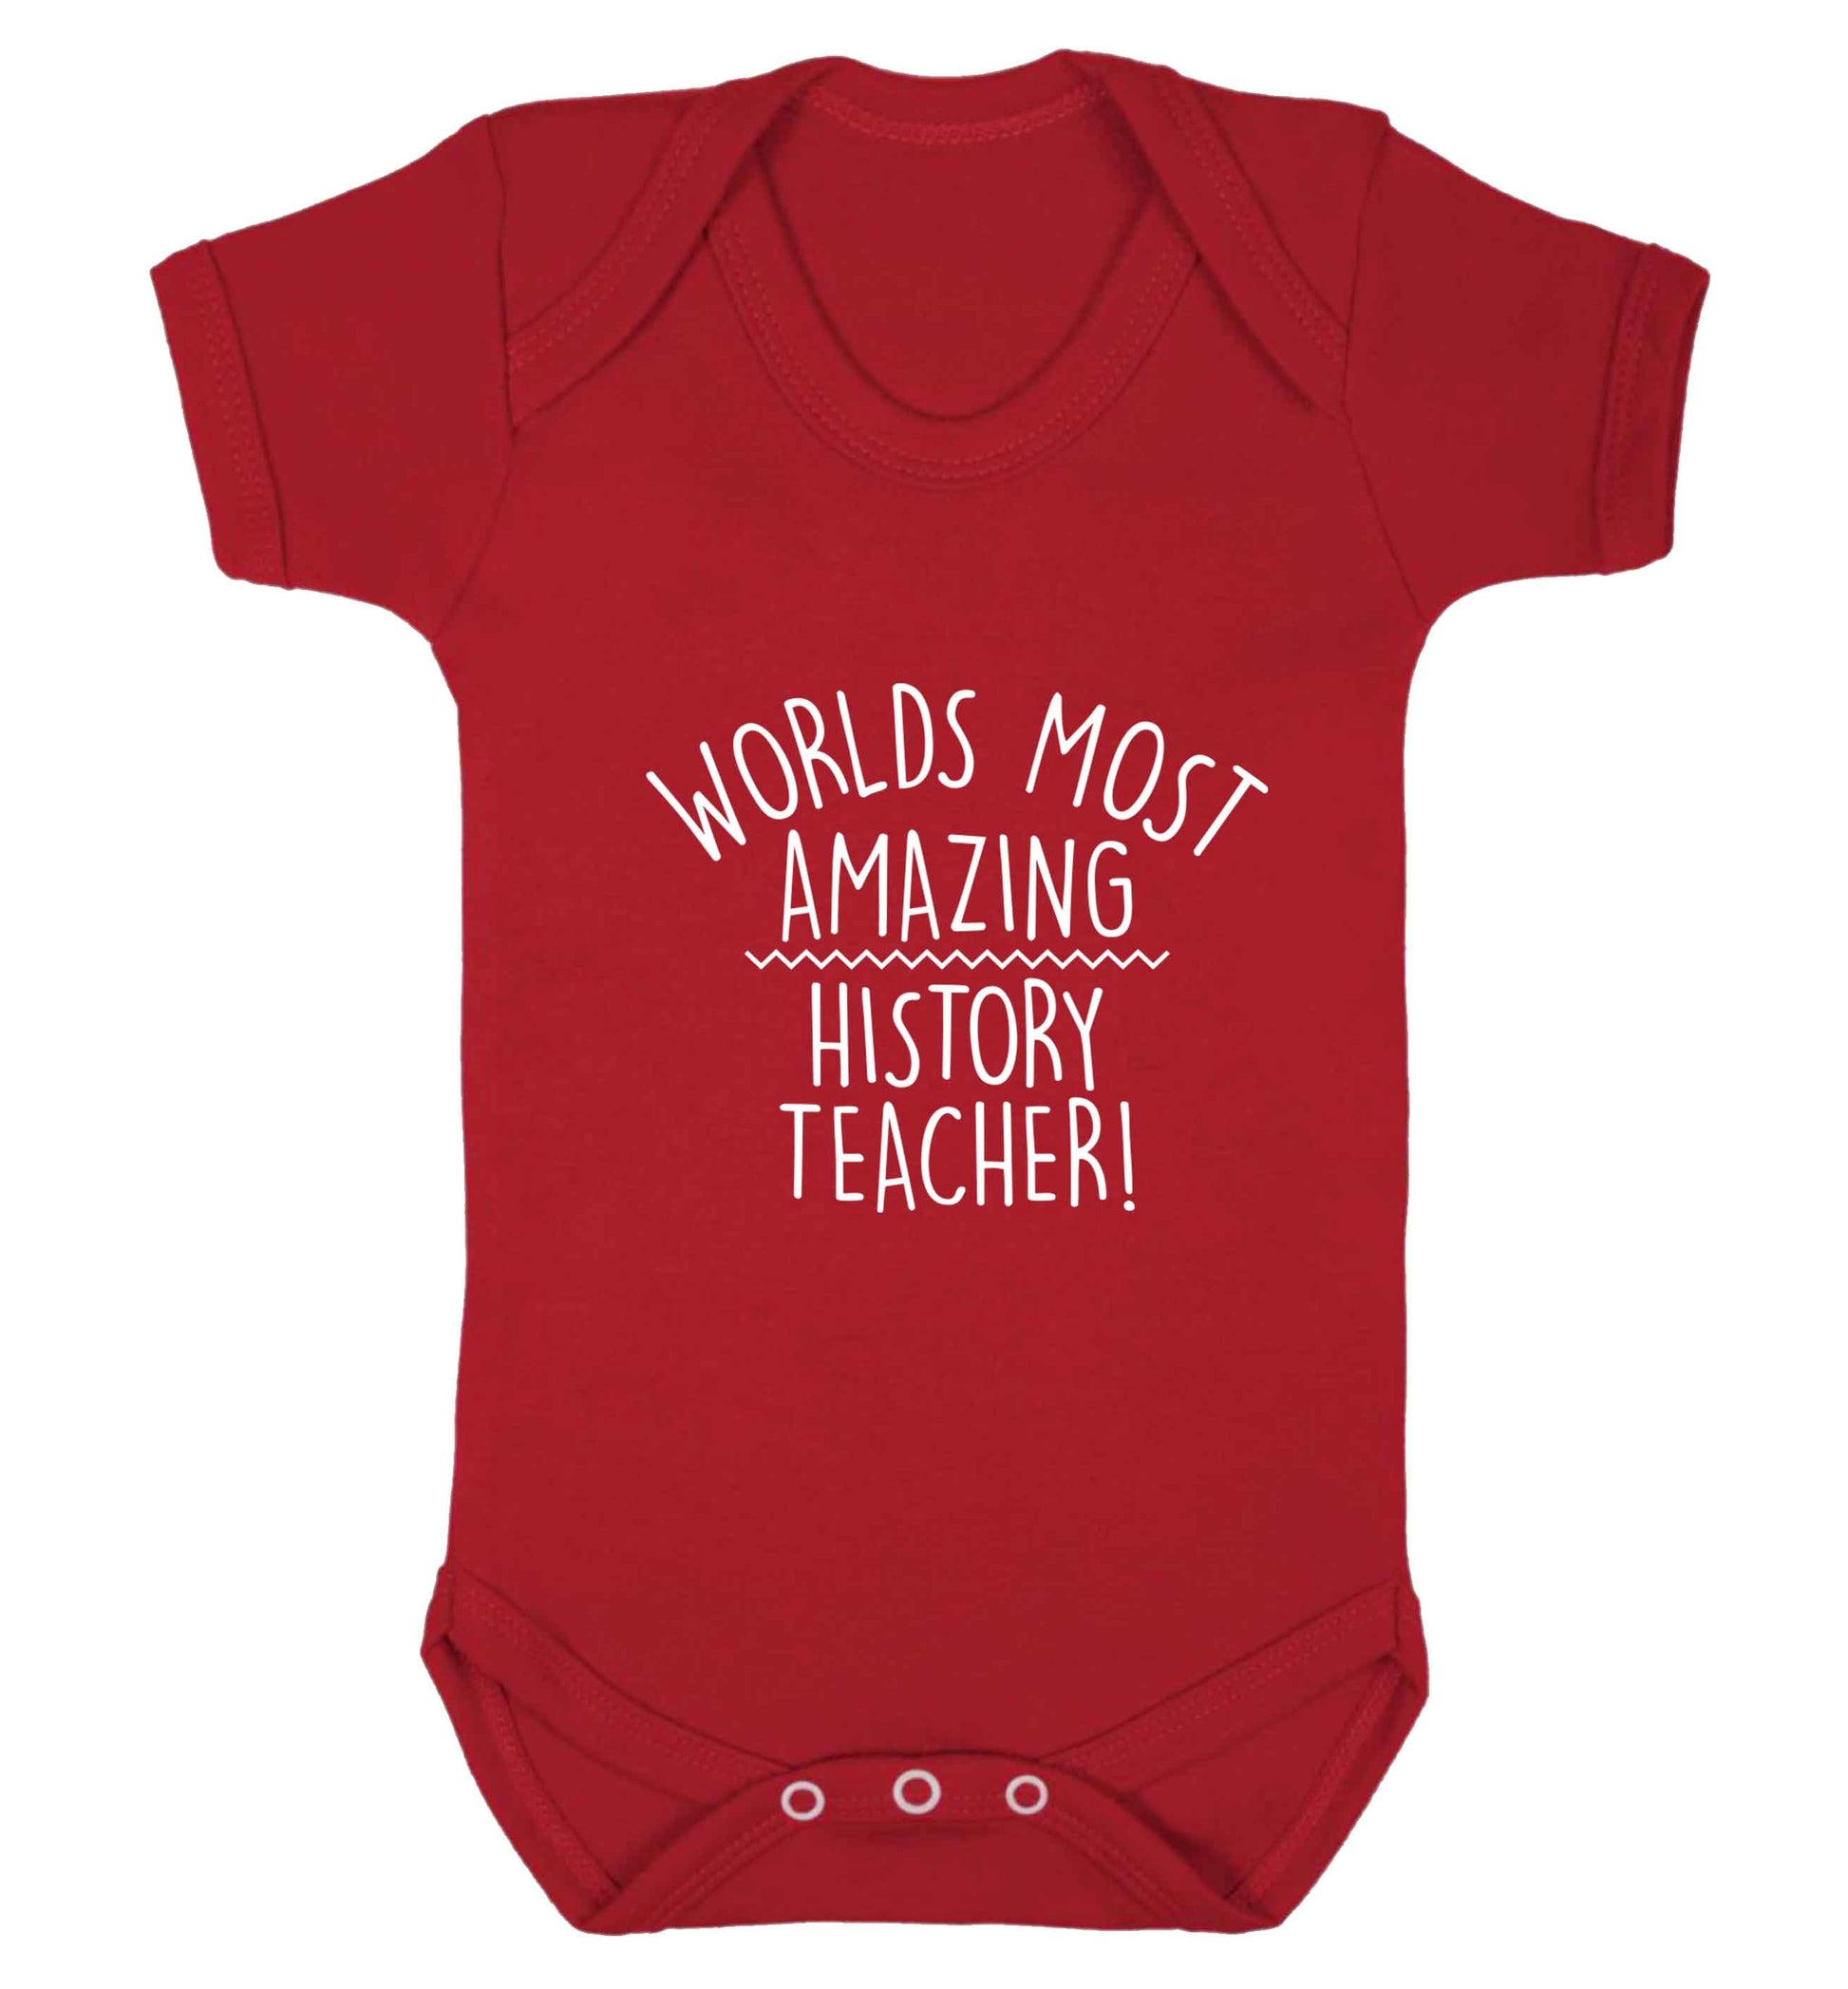 Worlds most amazing History teacher baby vest red 18-24 months